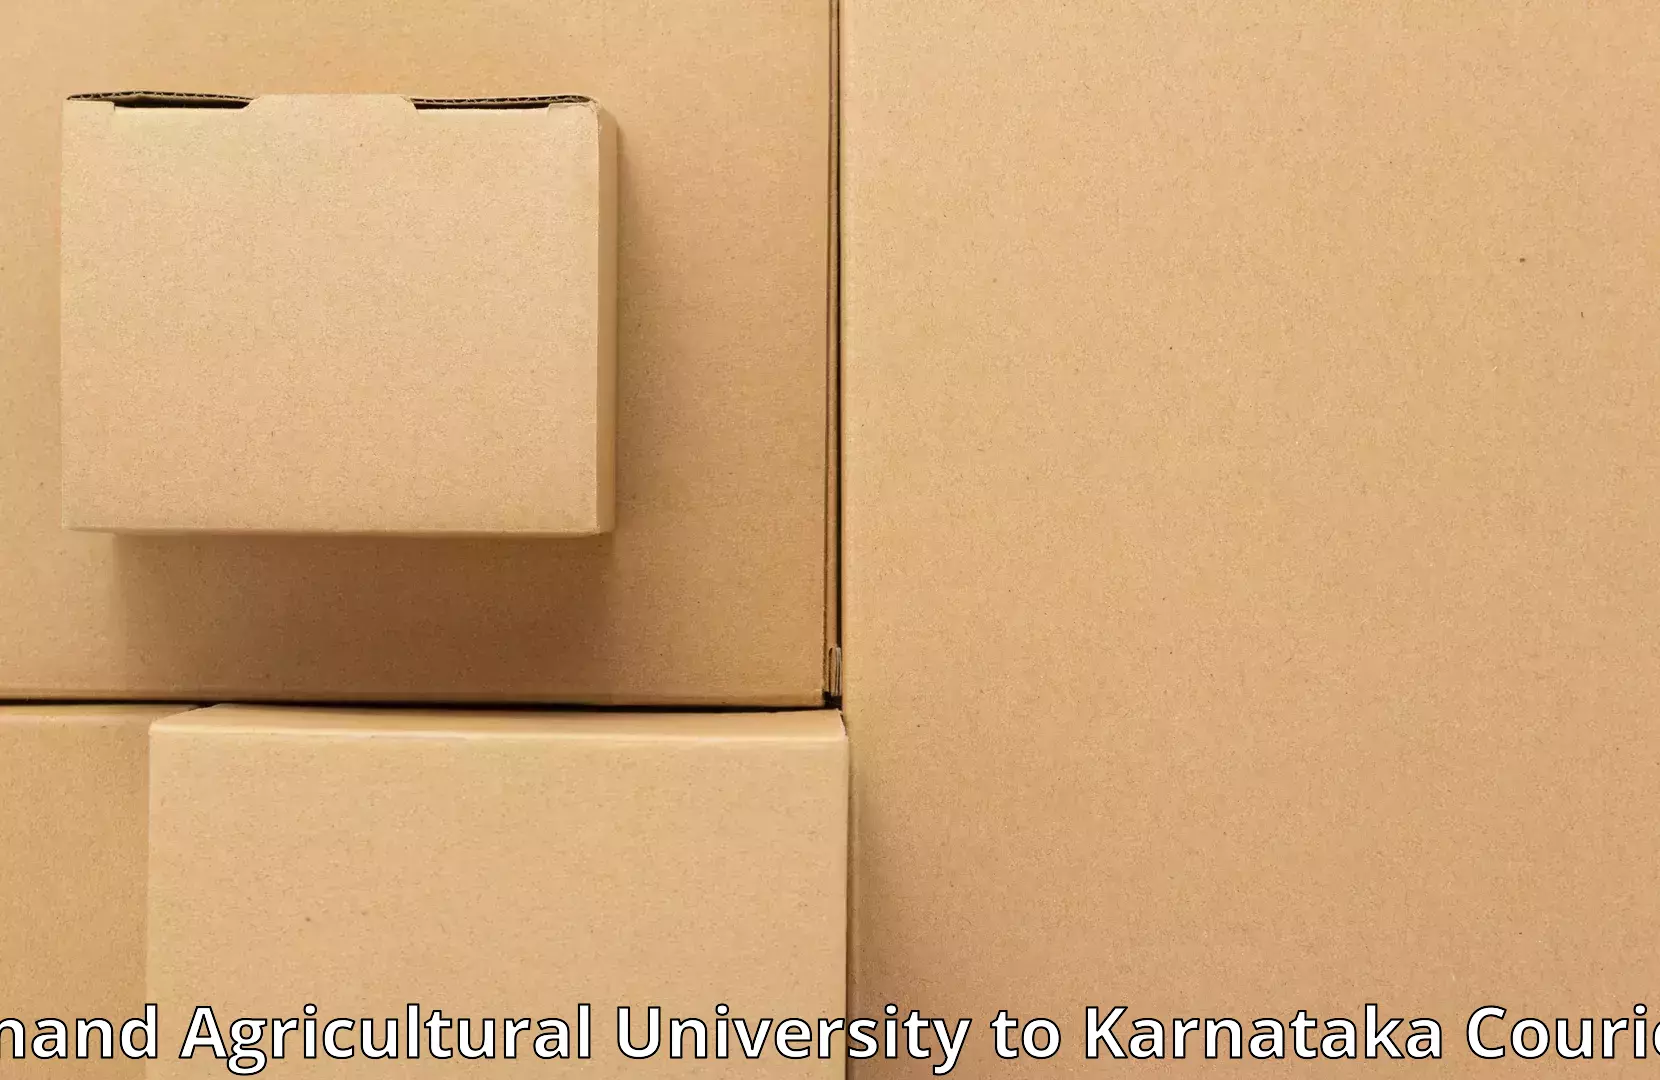 Moving and storage services Anand Agricultural University to Chikkaballapur